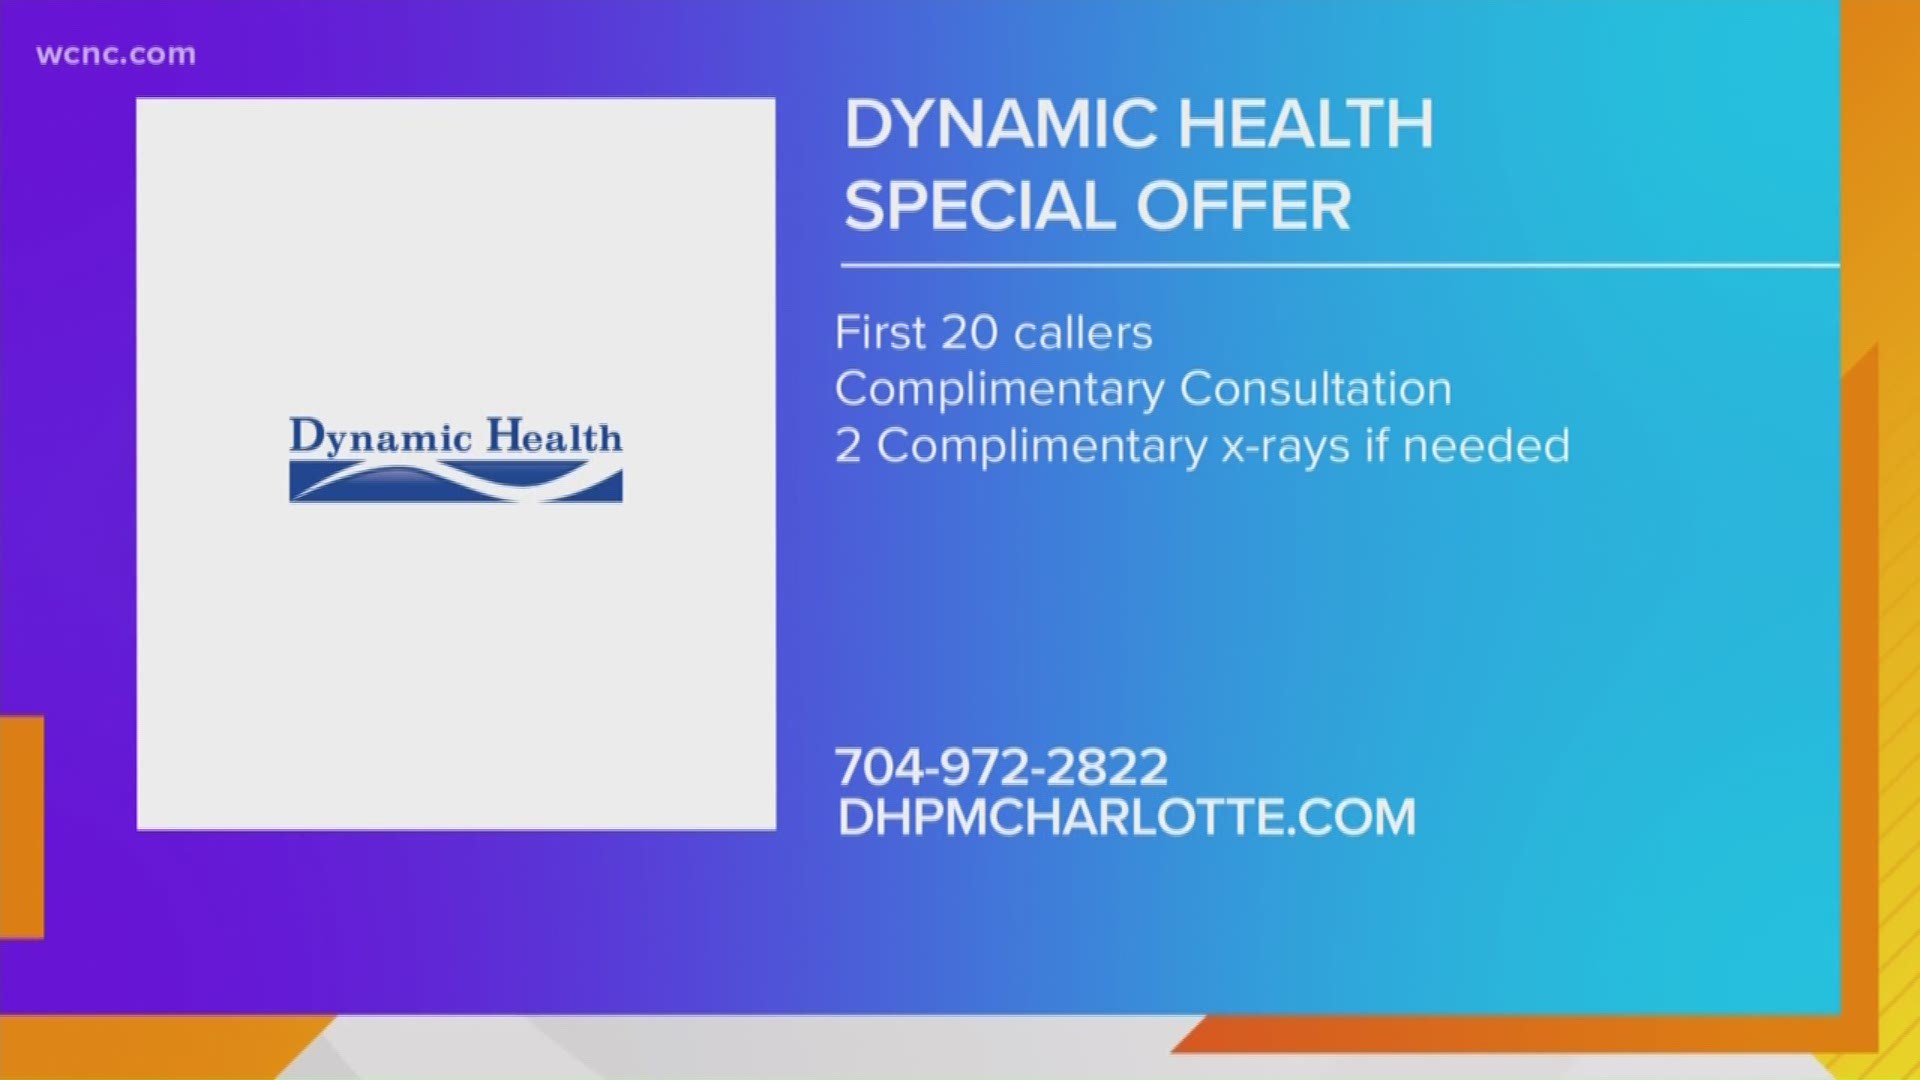 Dynamic Health in Charlotte offers a treatment that diminishes arthritis pain. Dr. James Altizer shares how stem cell therapy works and the success he has seen.